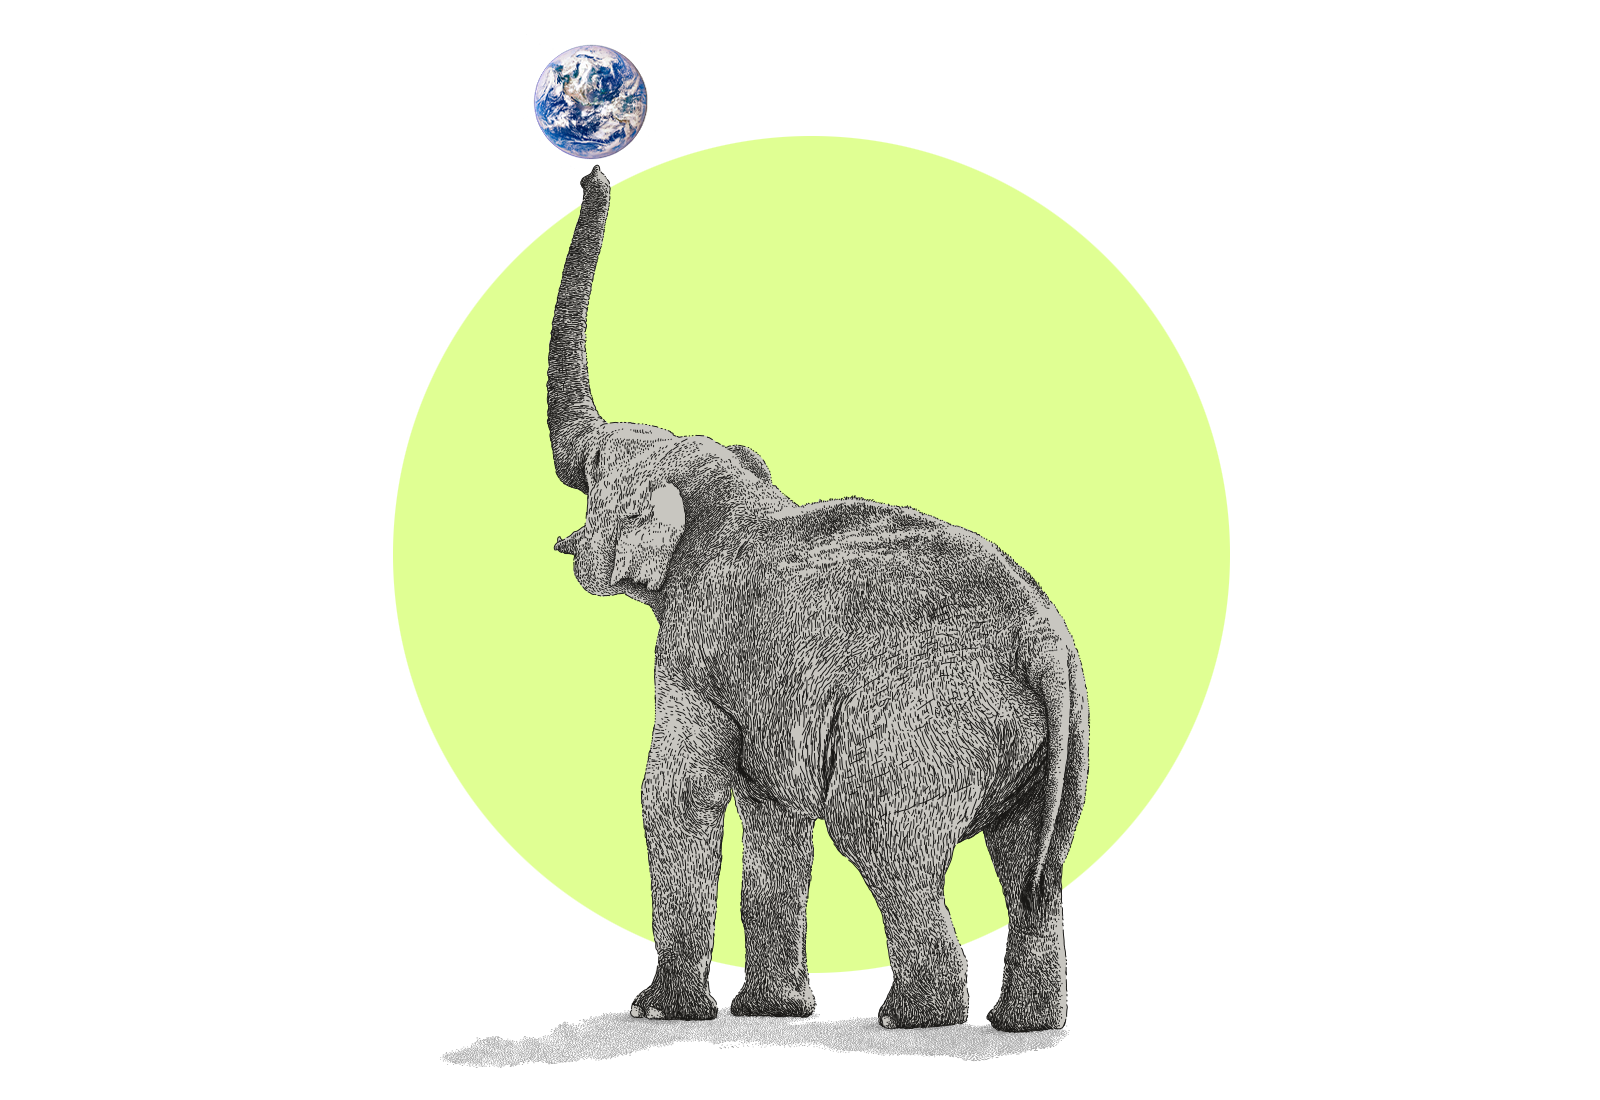 Illustration of an elephant balancing the Earth on the end of its trunk